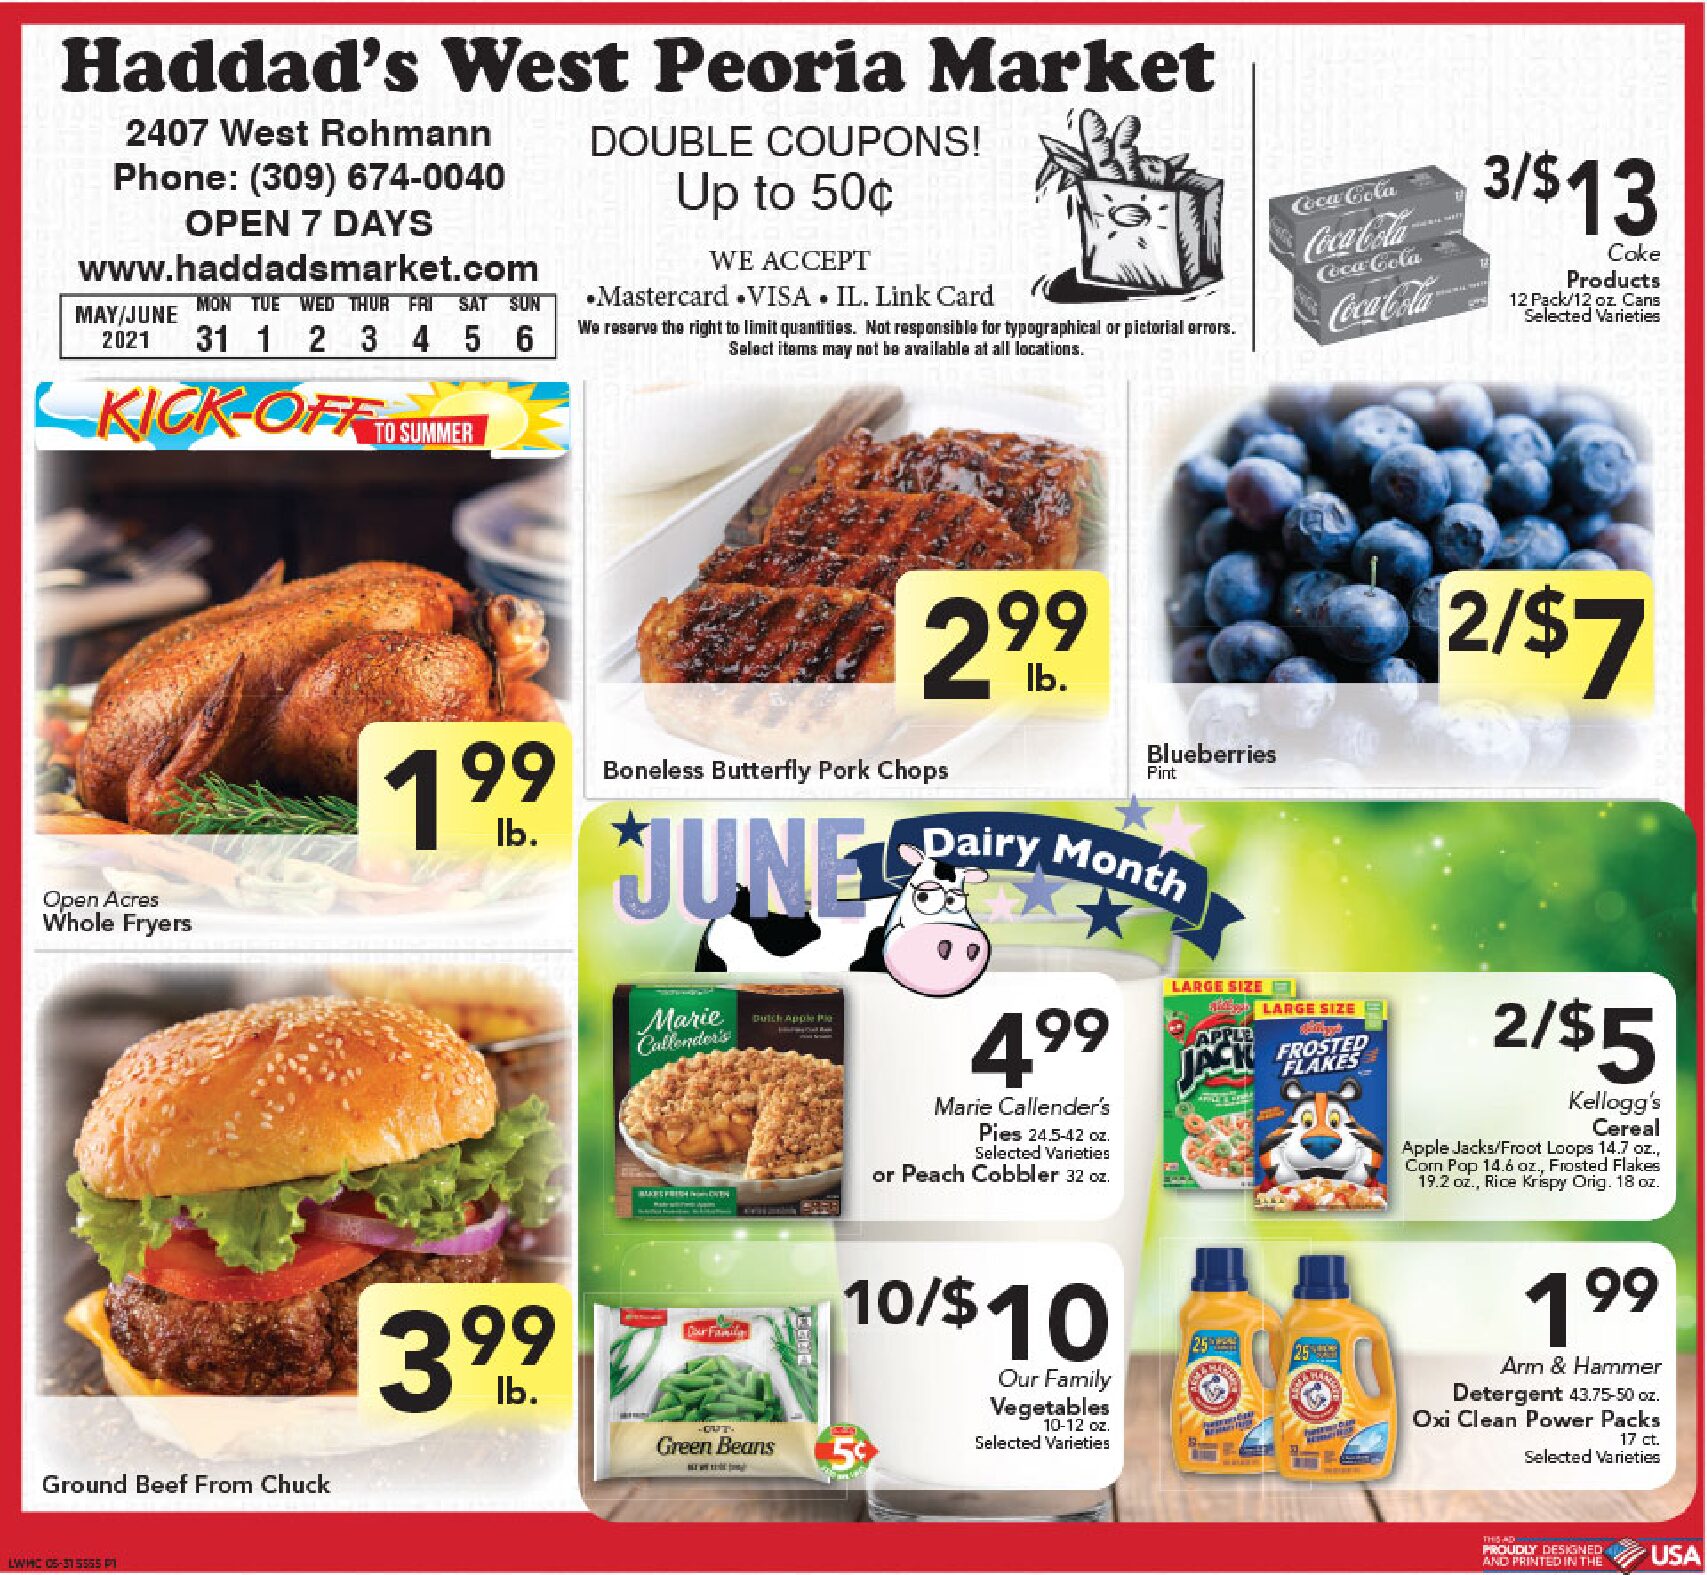 Meat - Welcome To Haddad's Market